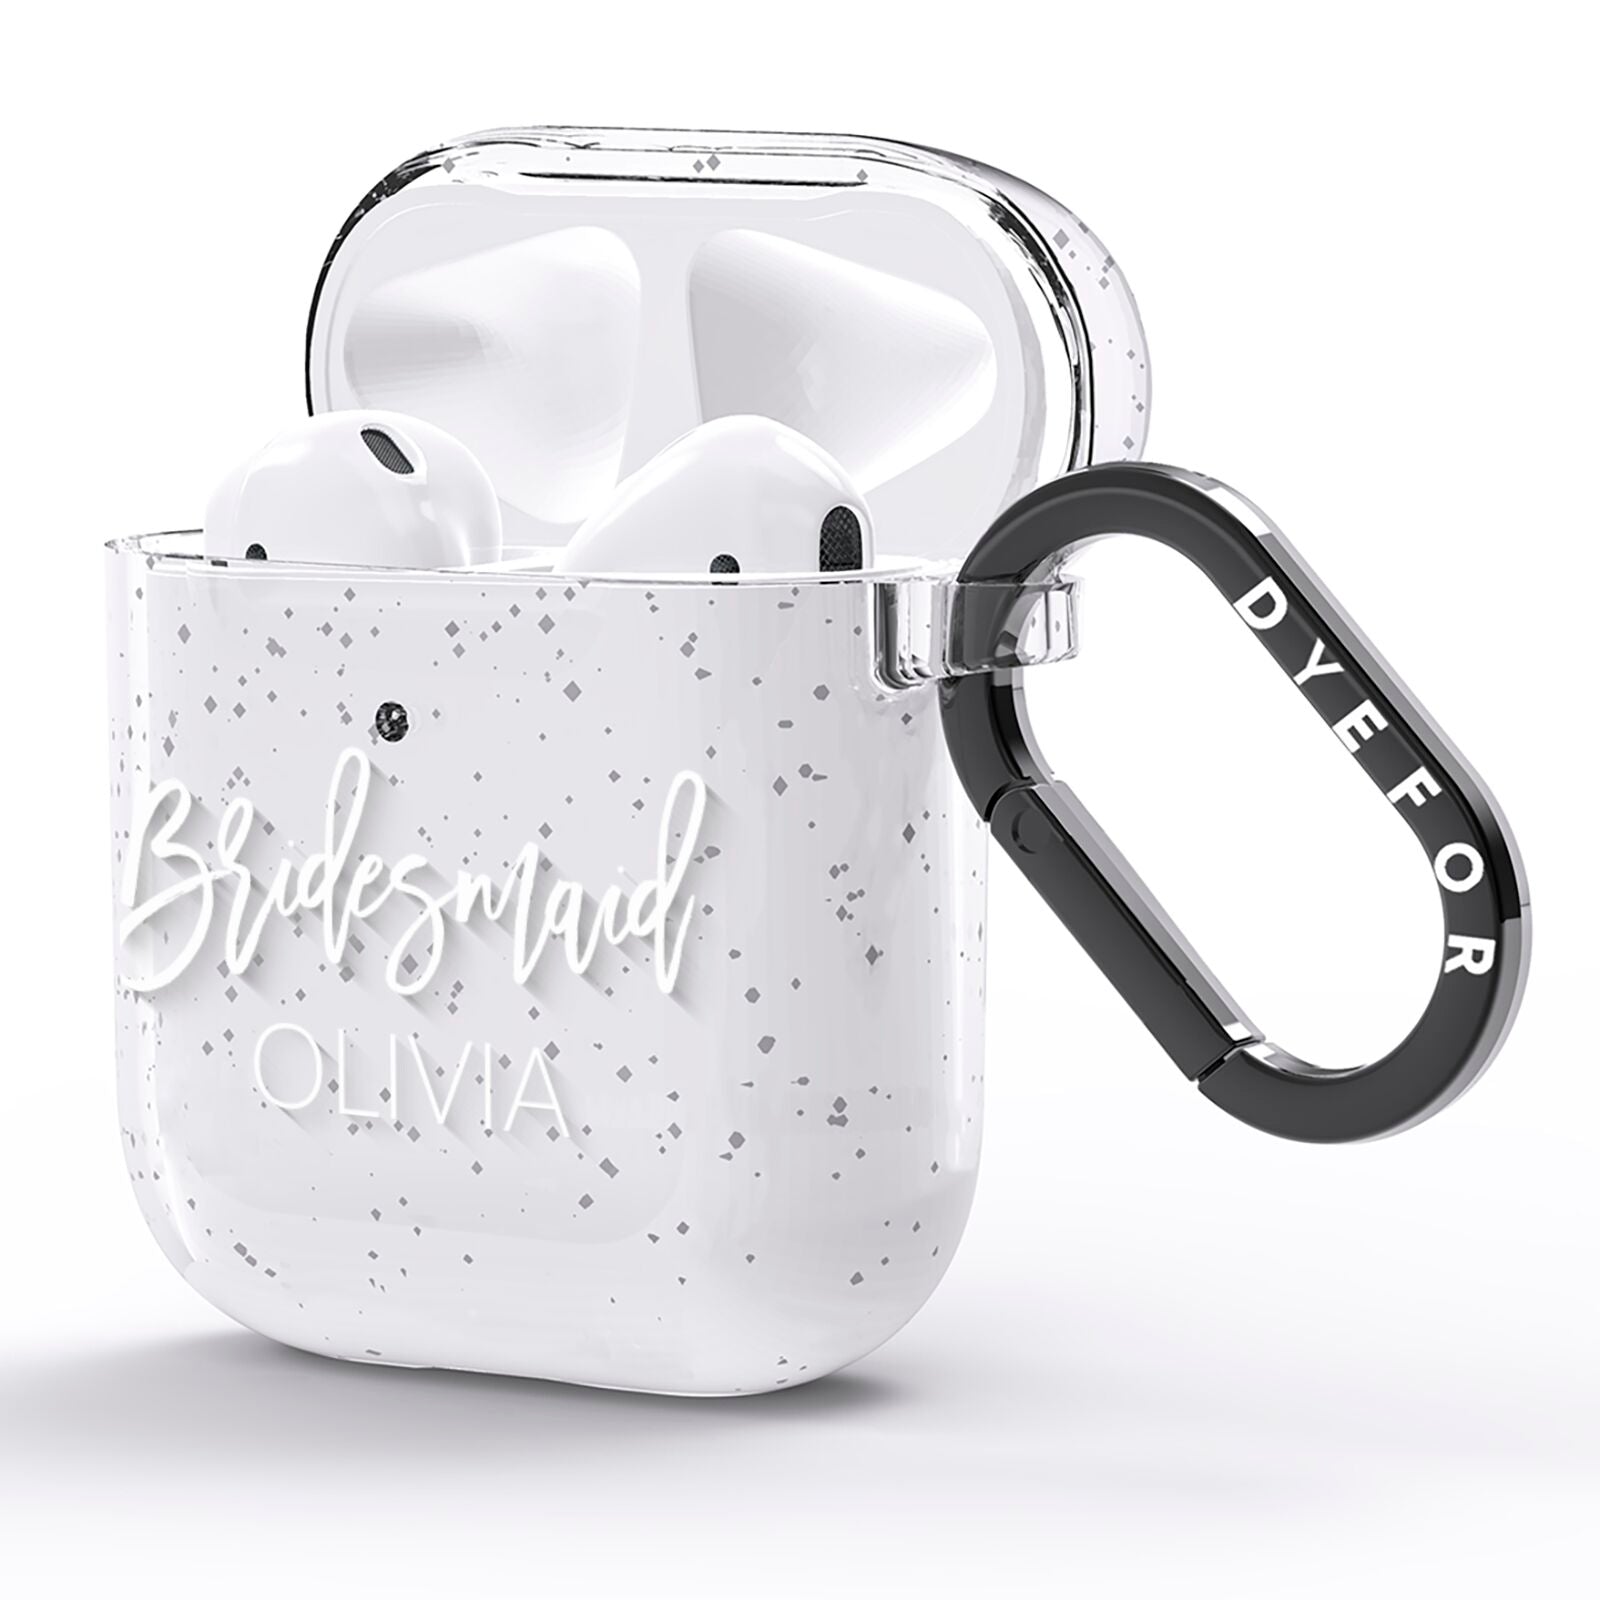 Bridesmaid Personalised AirPods Glitter Case Side Image